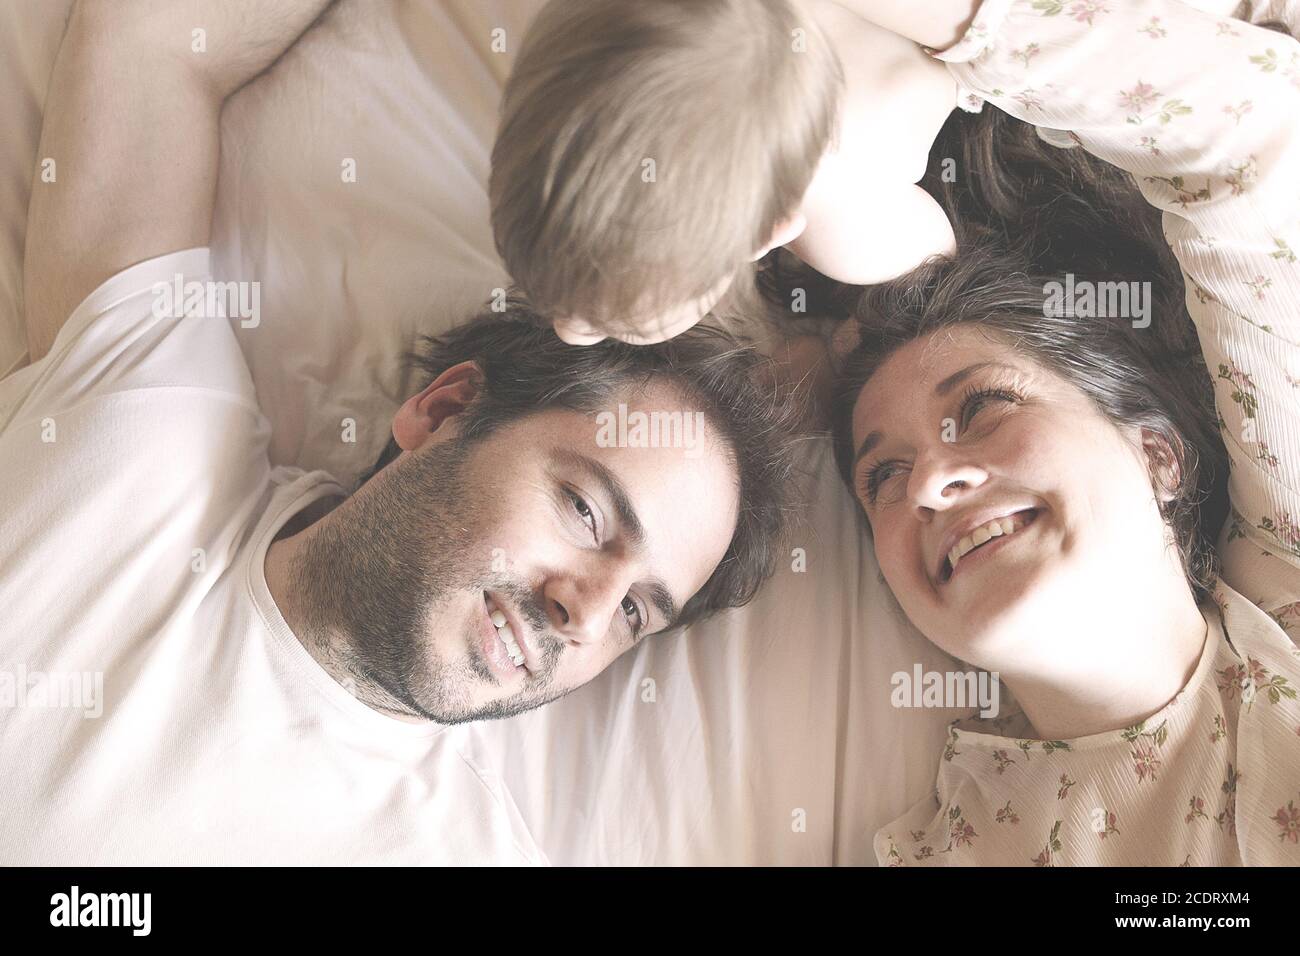 family in the privacy of the bedroom II Stock Photo